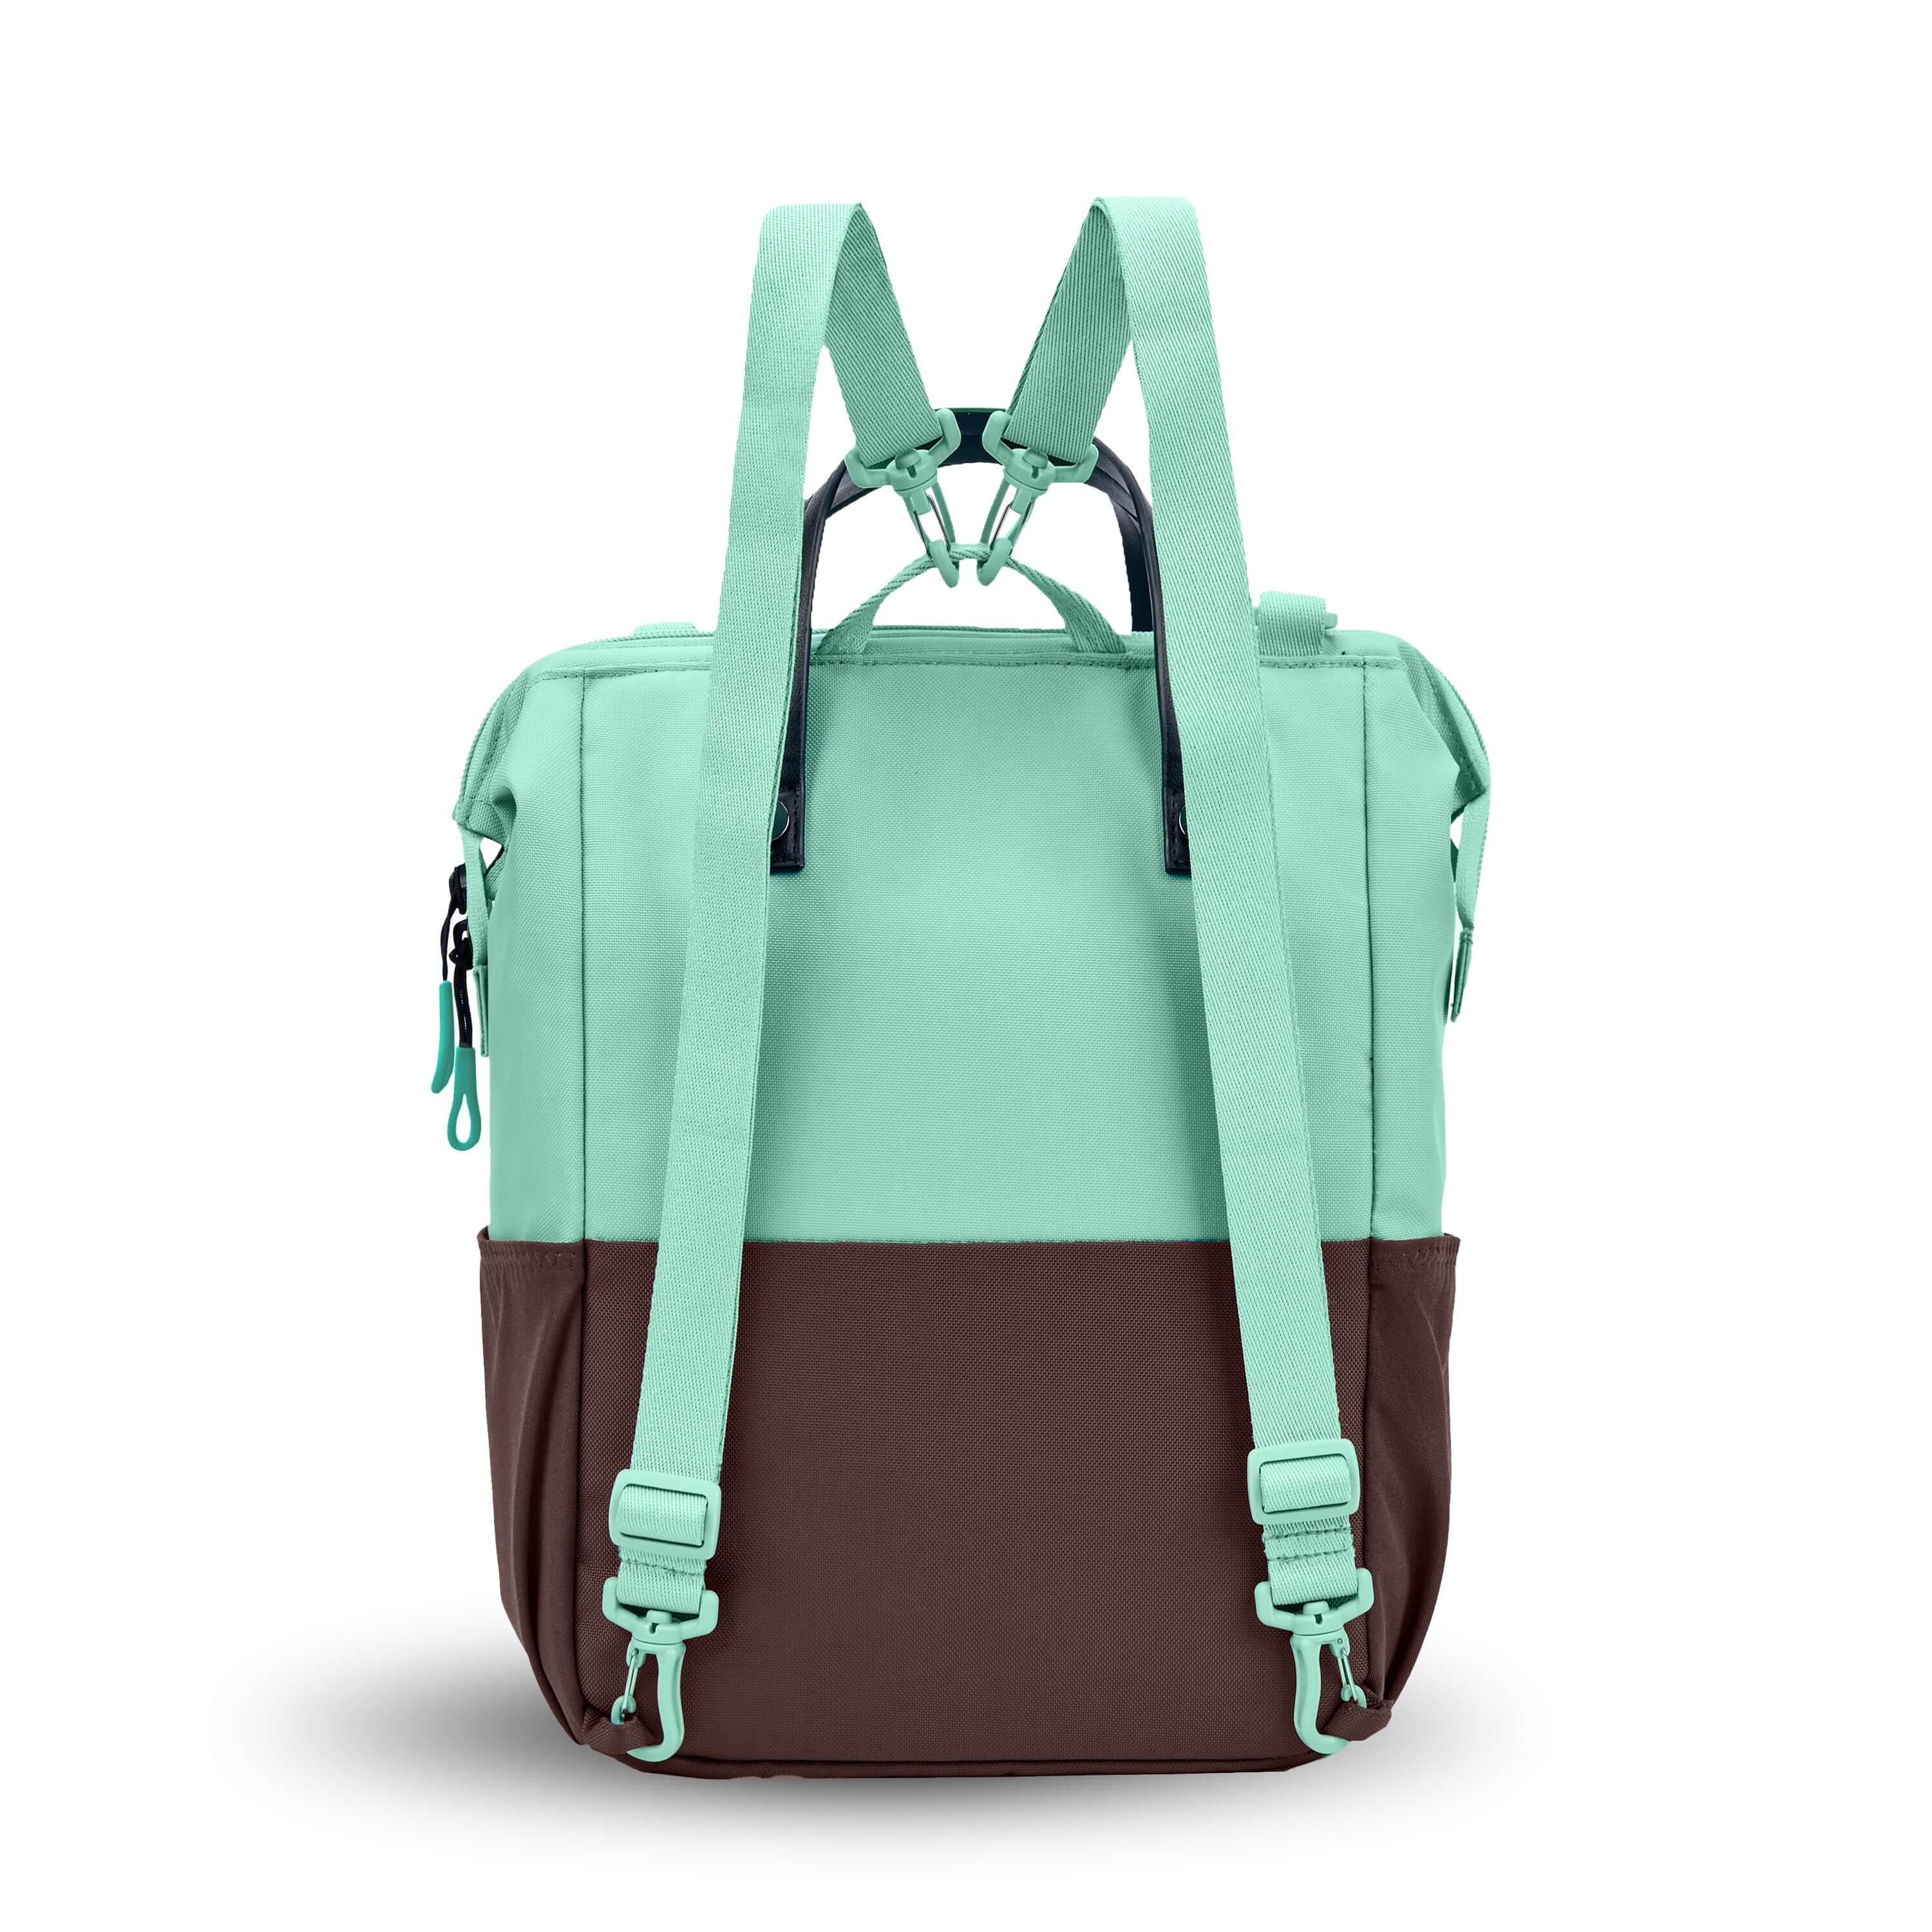 Back view of Sherpani three-in-one bag, the Dispatch in Seagreen. The detachable straps are shown in the backpack style.